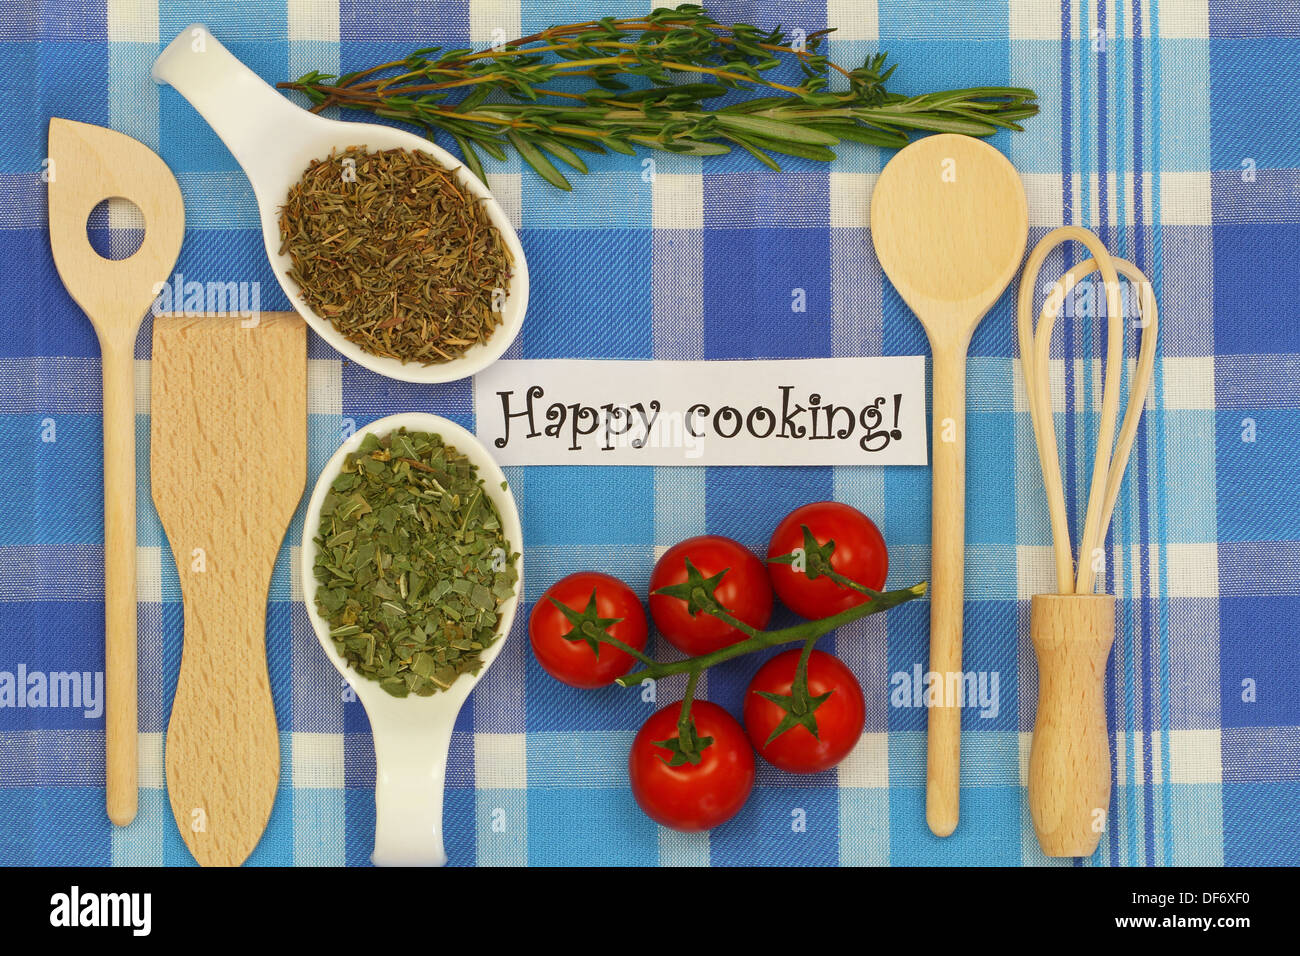 Happy cooking with selection of ingredients on checkered tablecloth Stock Photo